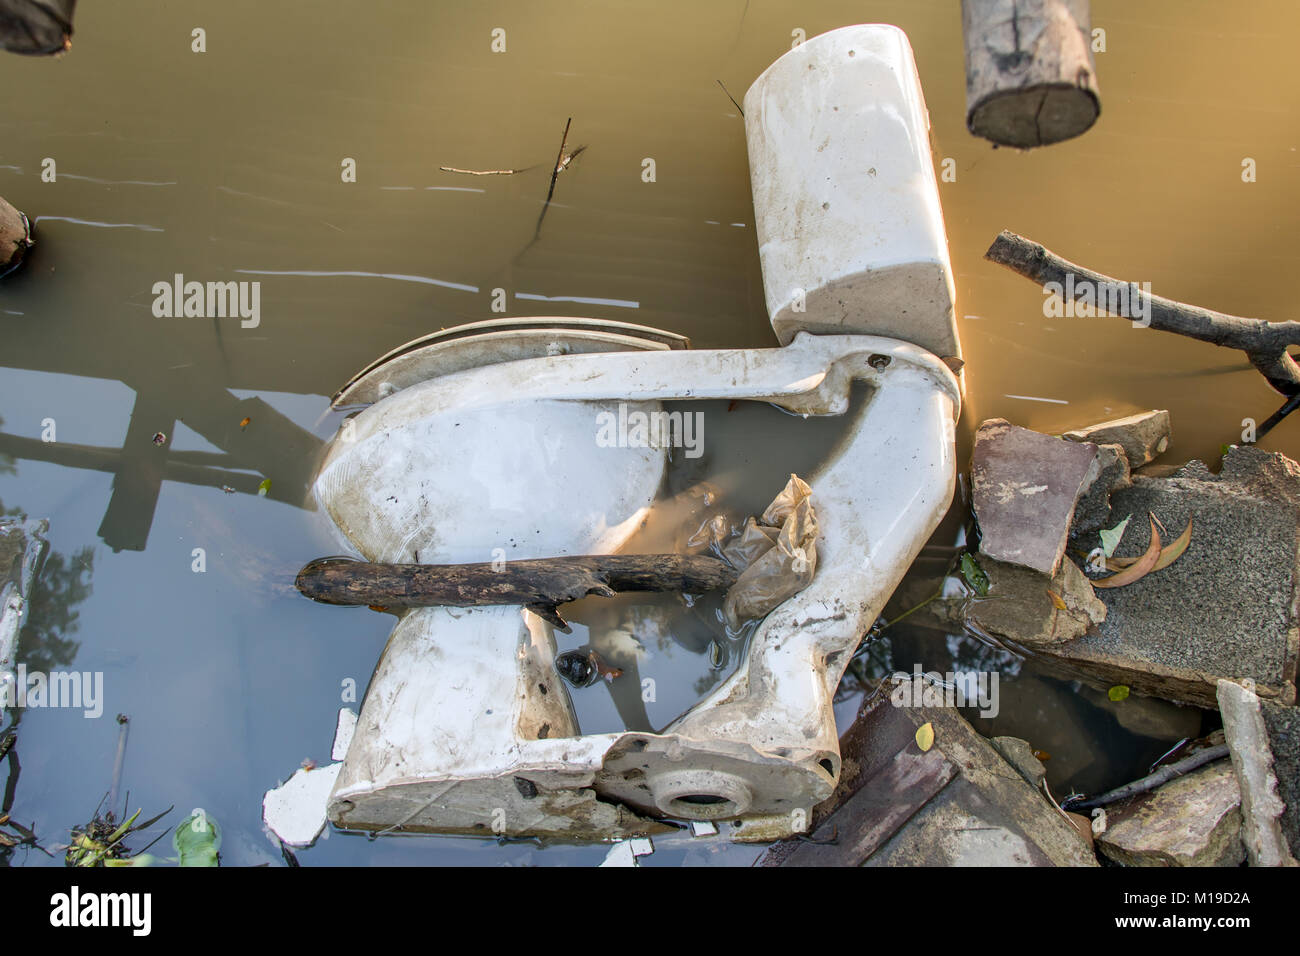 An old toilet bowl is in the water. River waste, Thailand. Stock Photo